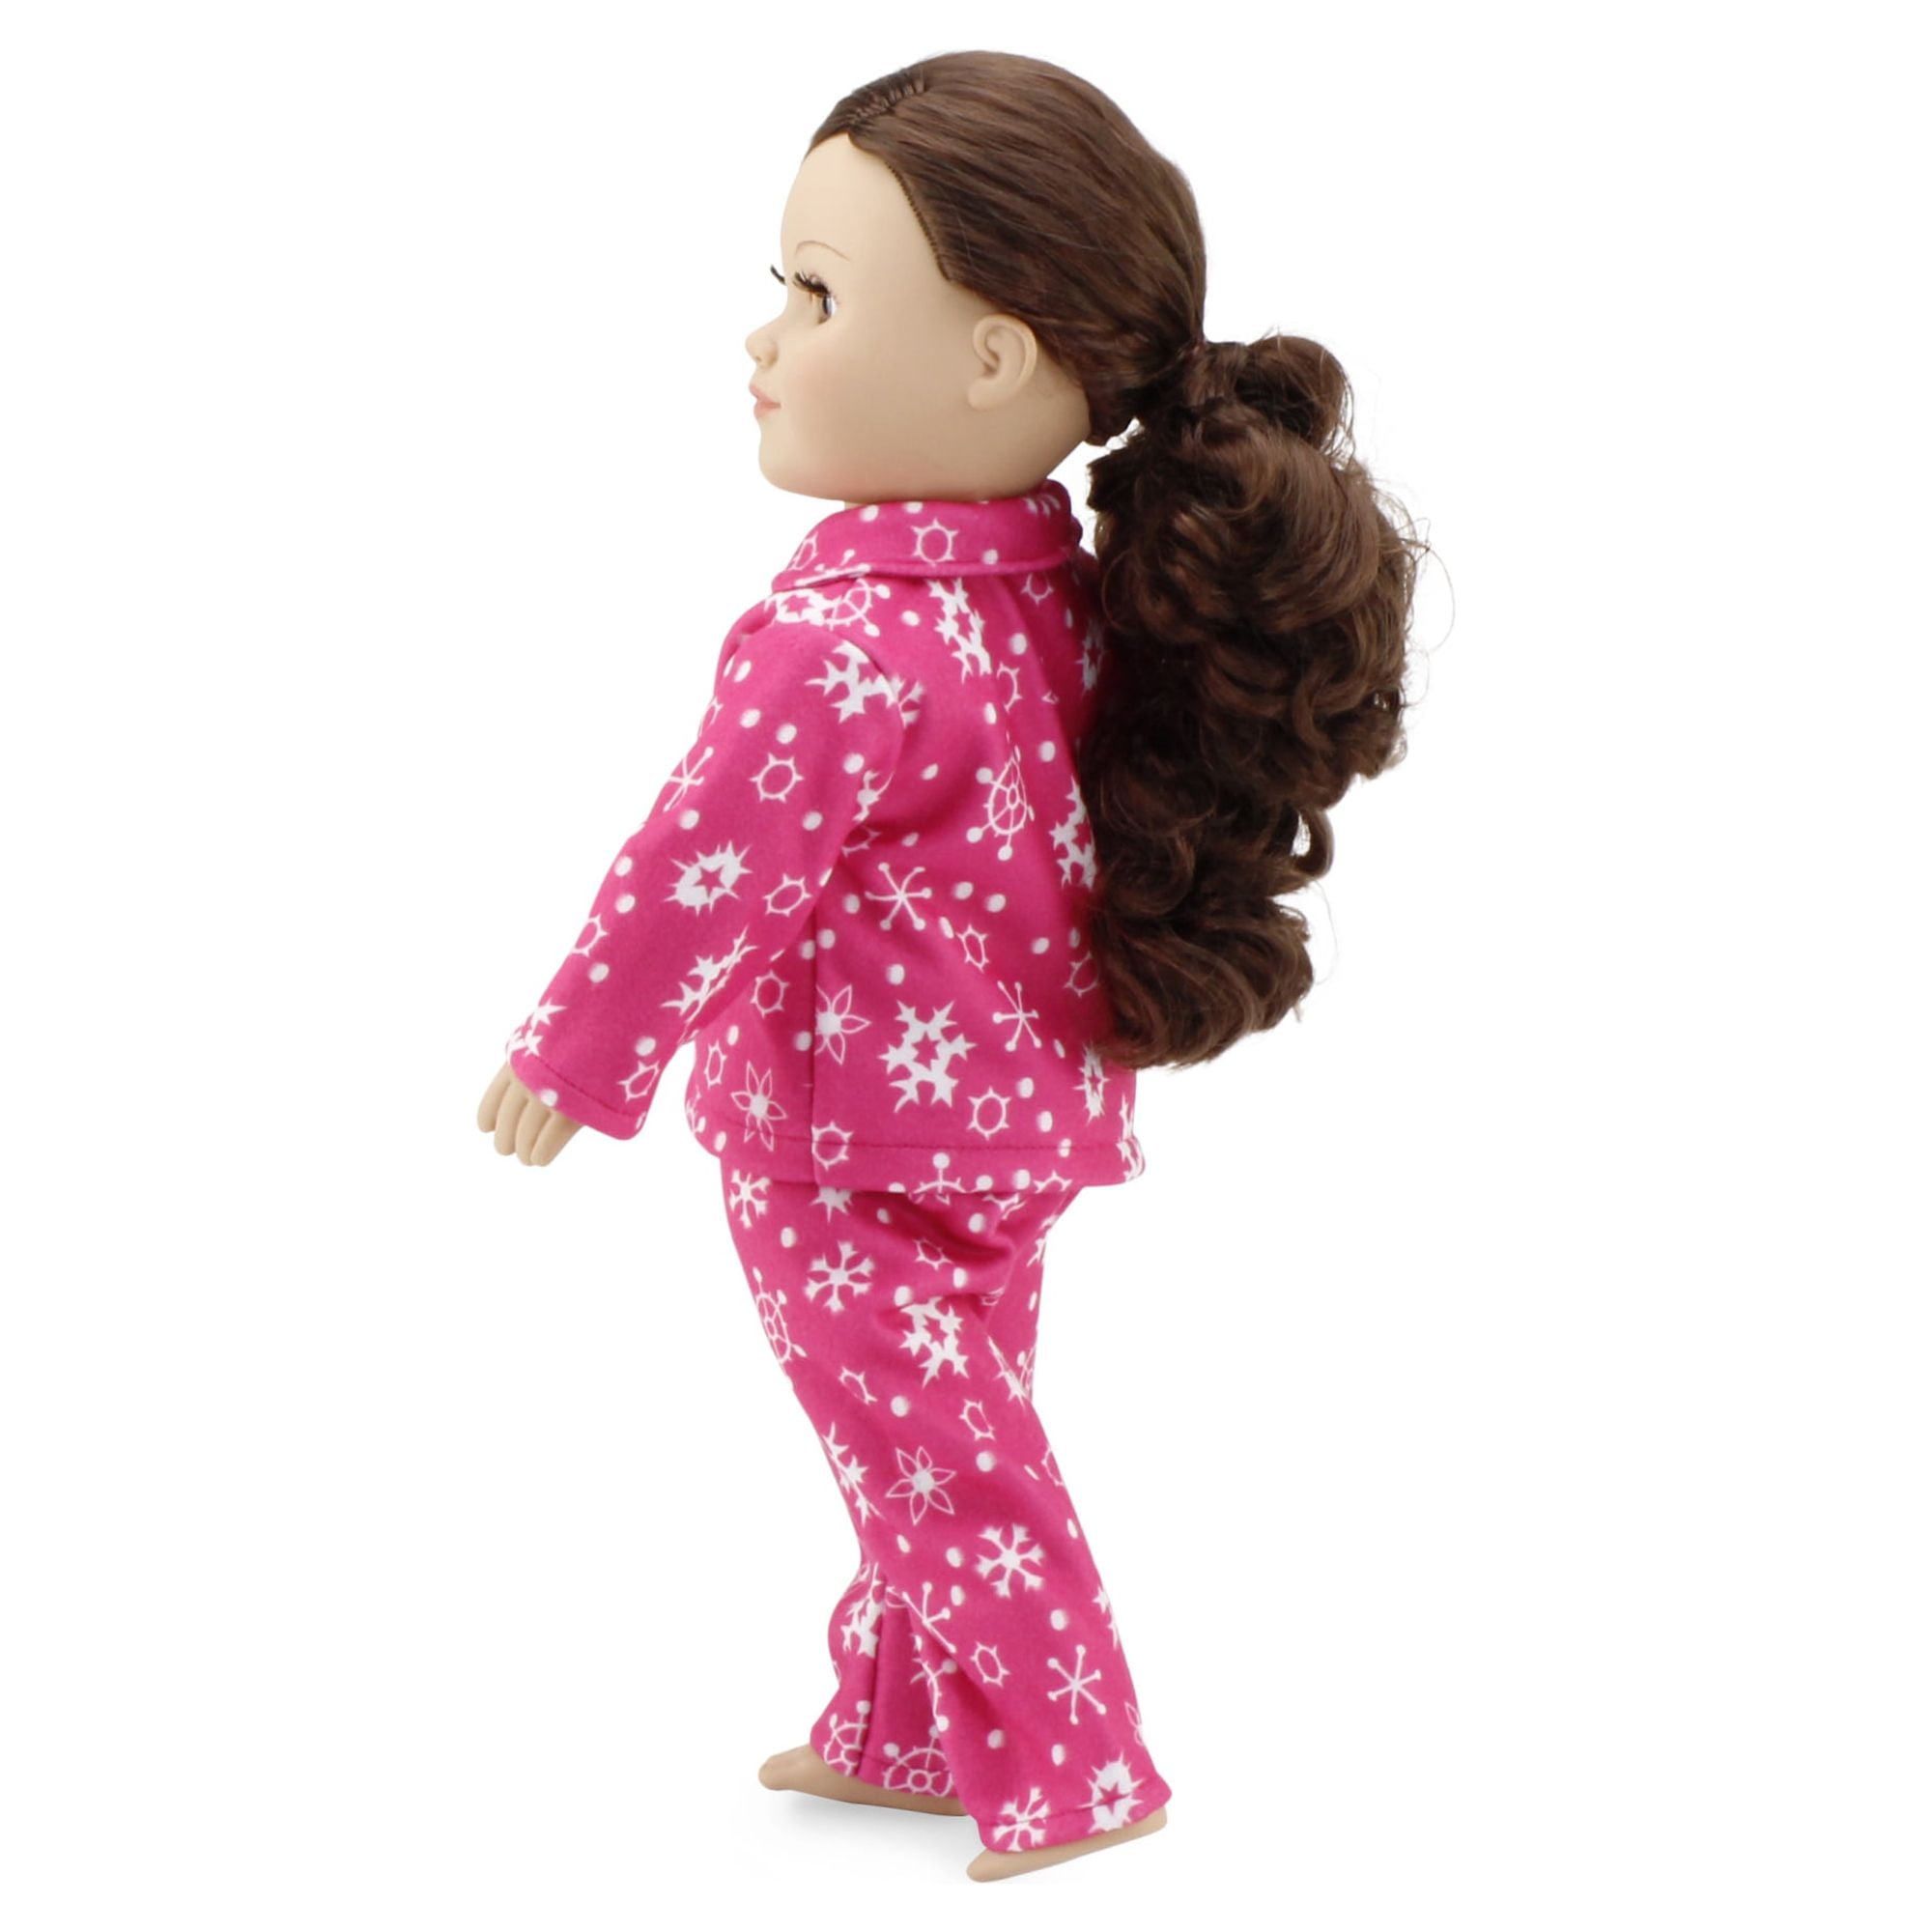 Emily Rose 18 Inch Doll Clothes Clothing Accessories - 2 Piece PJs